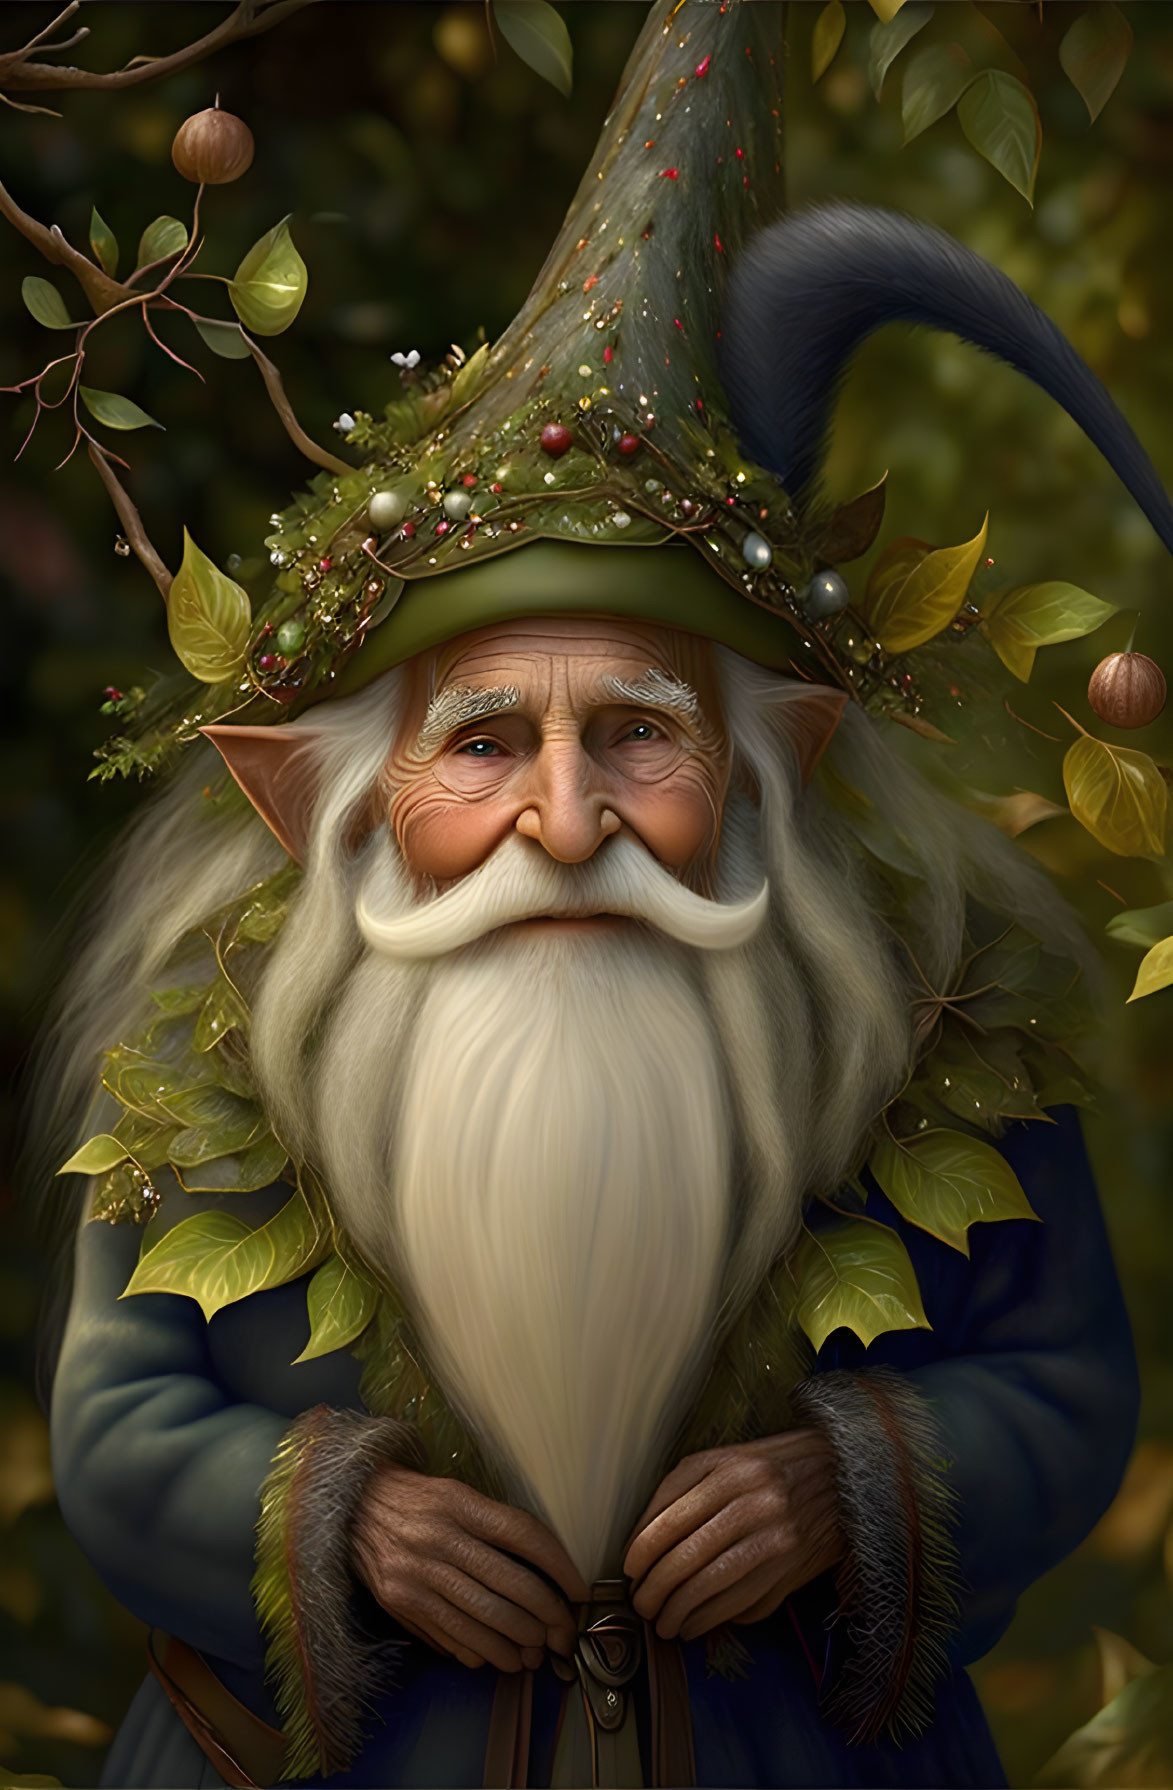 Elderly wizard with long white beard in forest setting